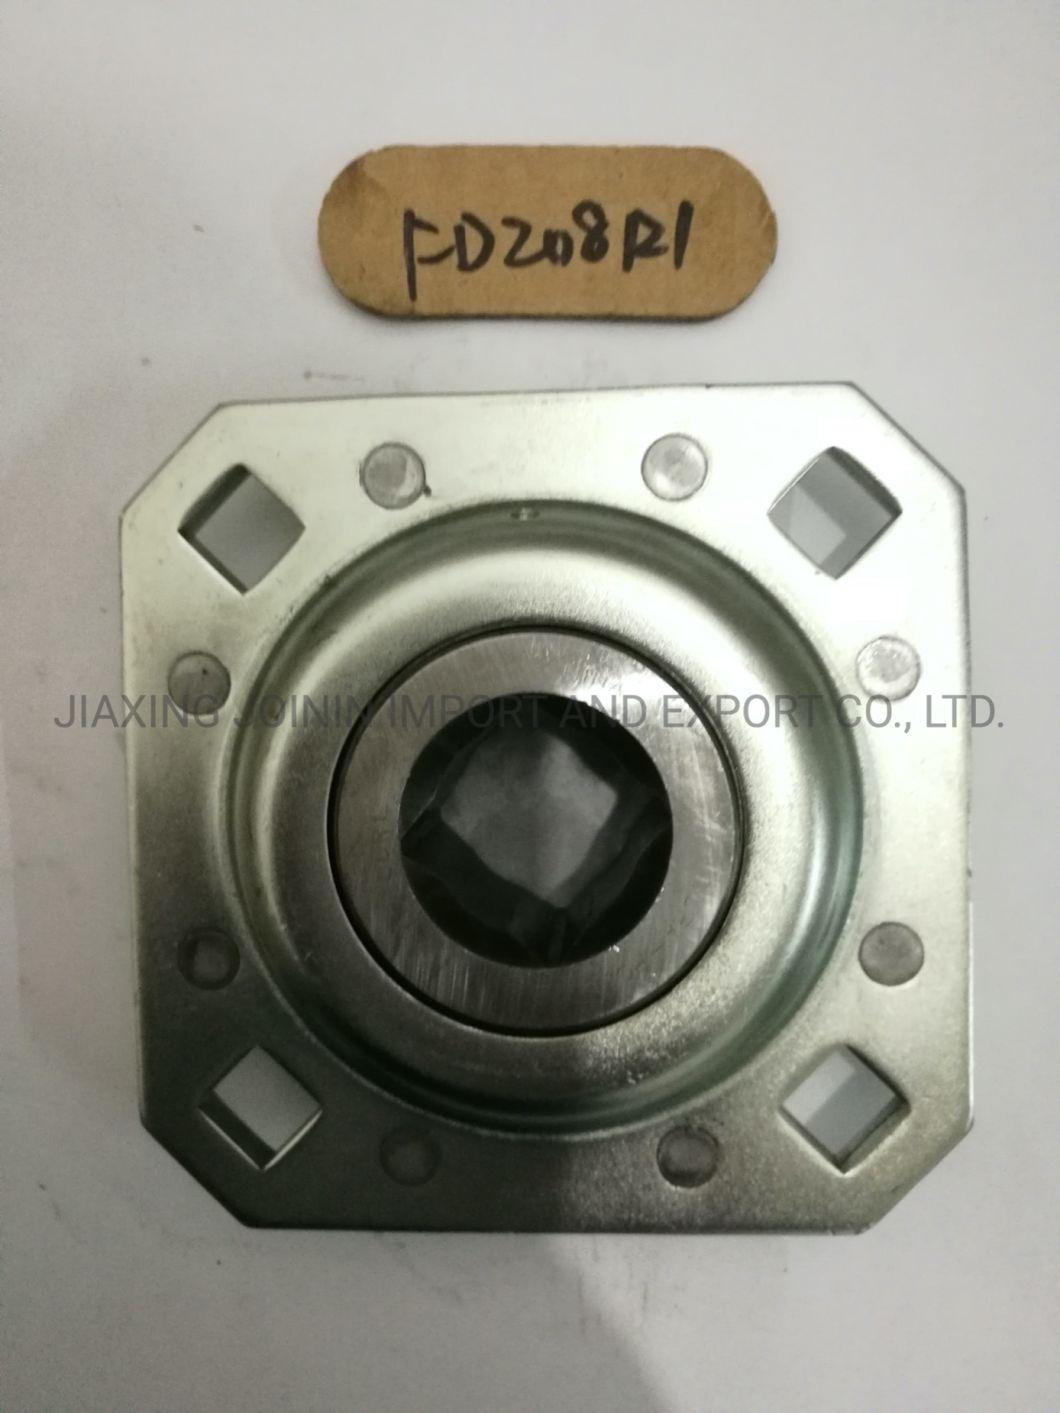 Fd208r1 High Quality Non-Relubricable Agricultural Bearing with Stamping Housing Square Bore Heavy Duty Farm Machinery Bearing Housing